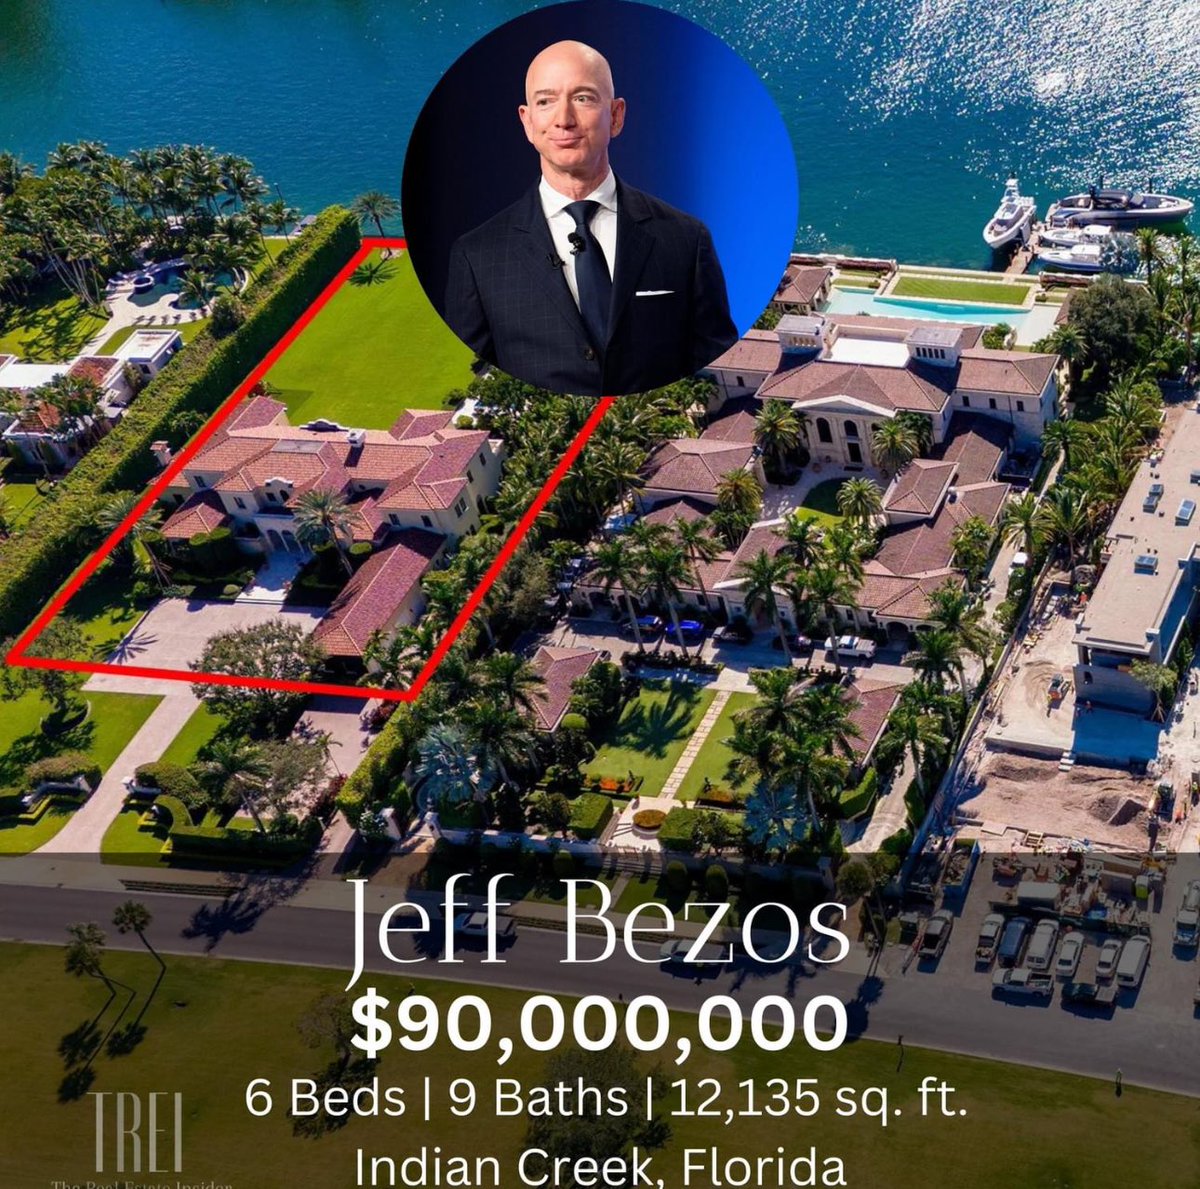 Jeff Bezos just bought a 6 bedroom house in south Florida for $90 million… But Mar-A-Lago is only worth $18 million 🤣🤣🤣🤣🤣🤣n